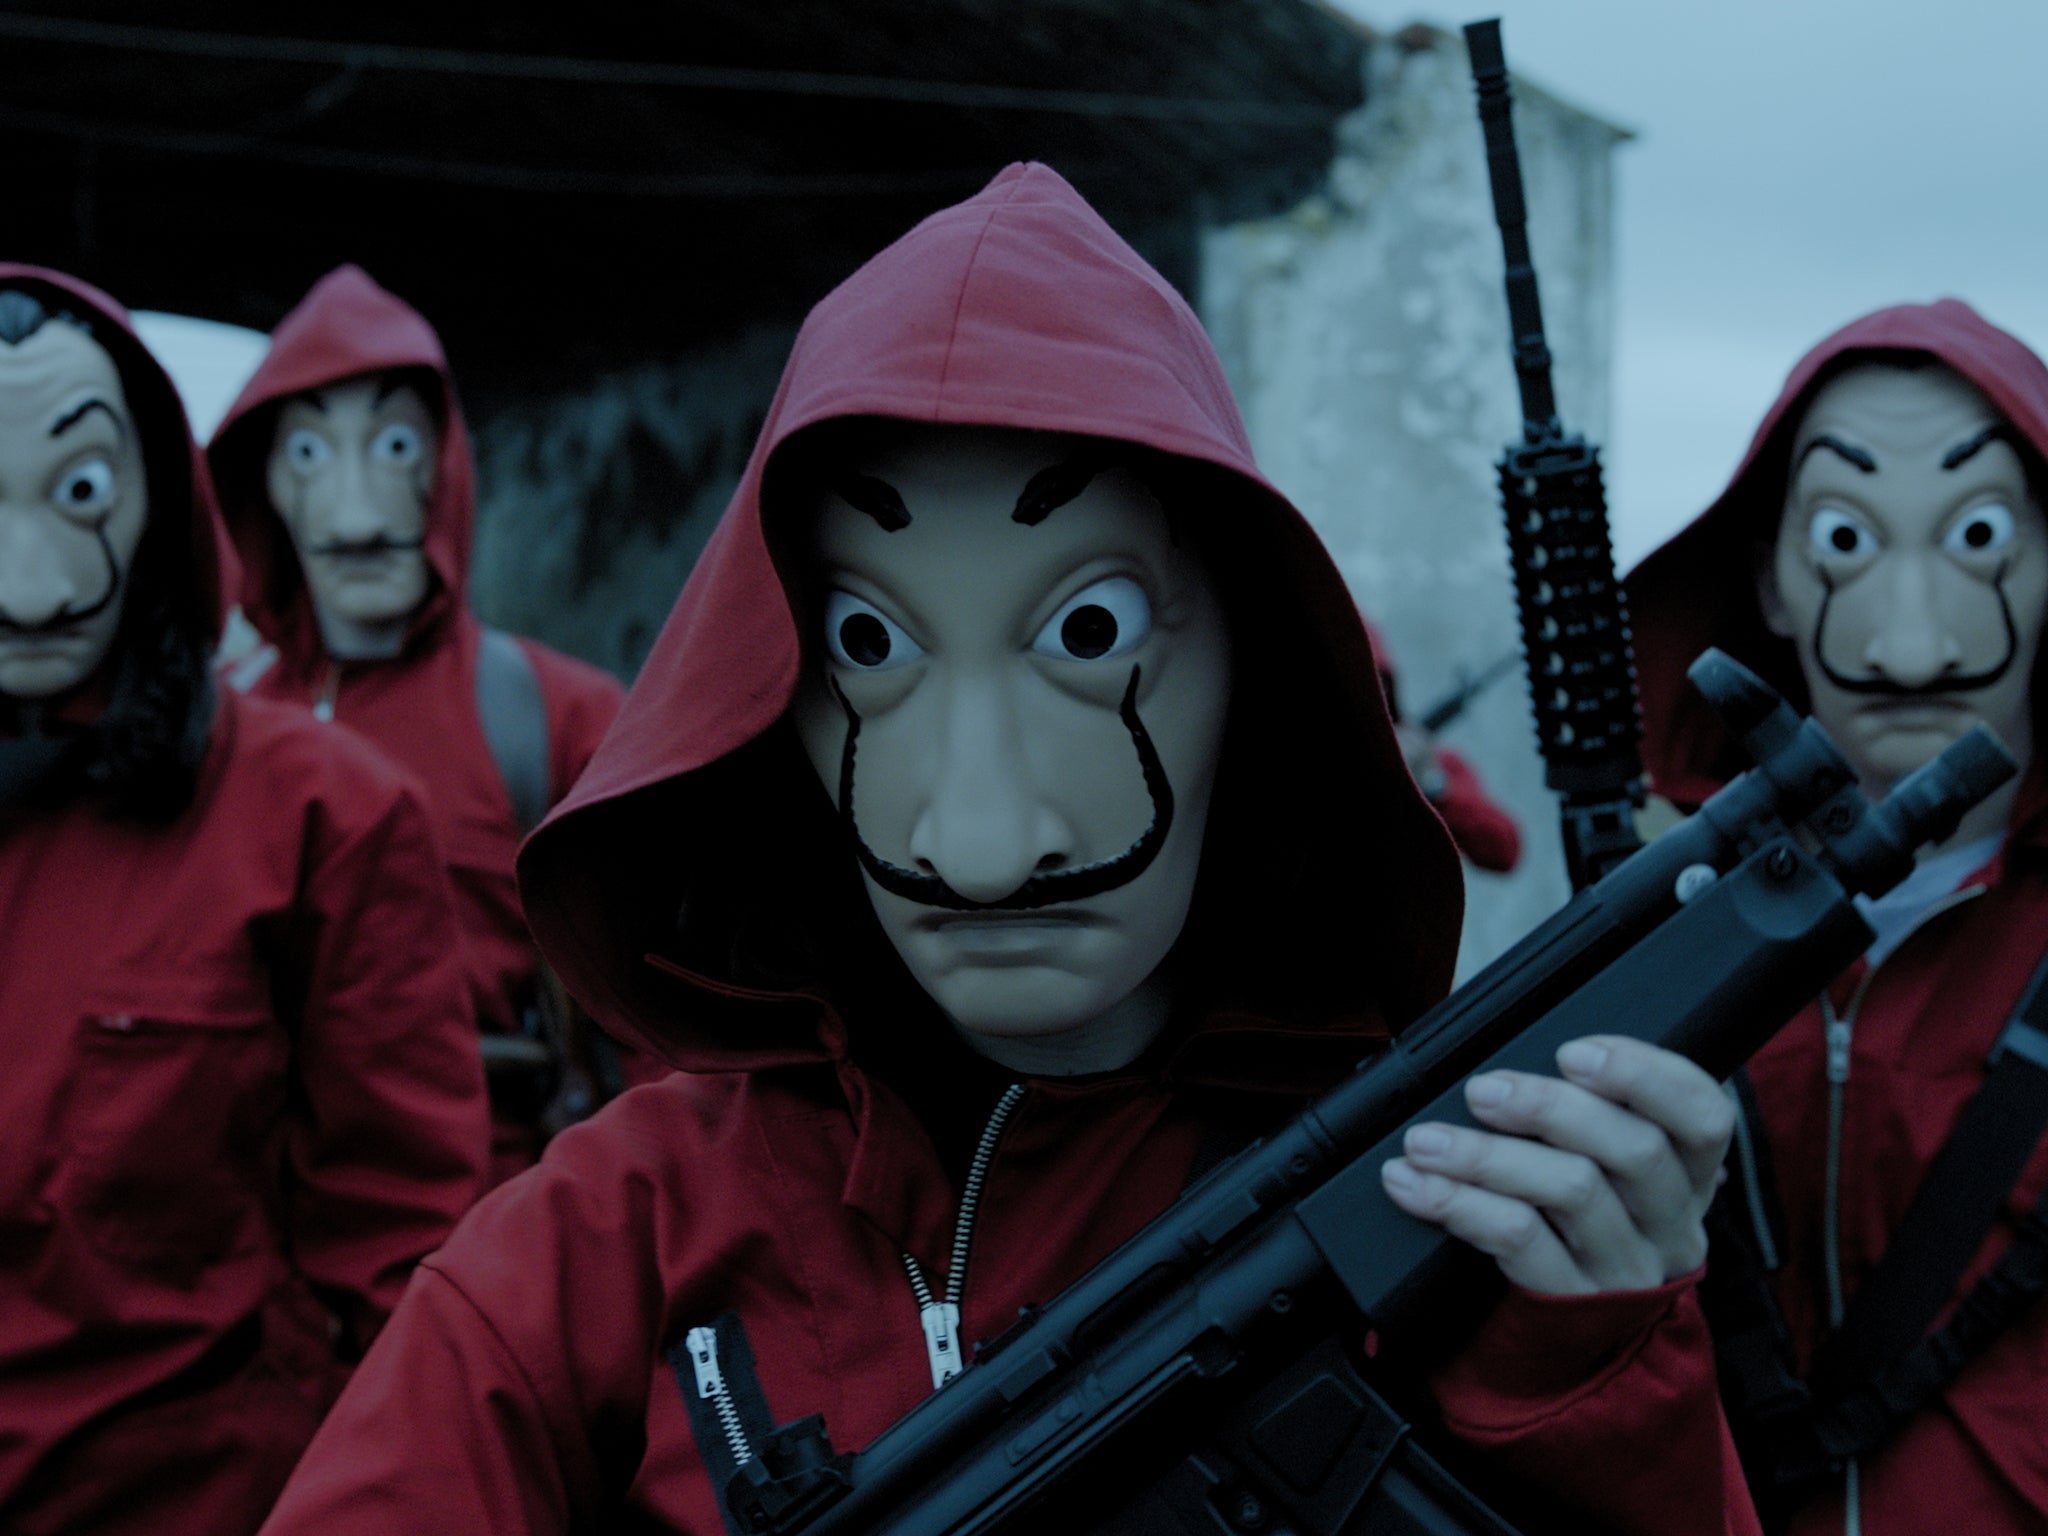 The Dalí masks and red boilersuits of ‘Money Heist’ have become a symbol of resistance beyond the series, having been used in political protests in Puerto Rico